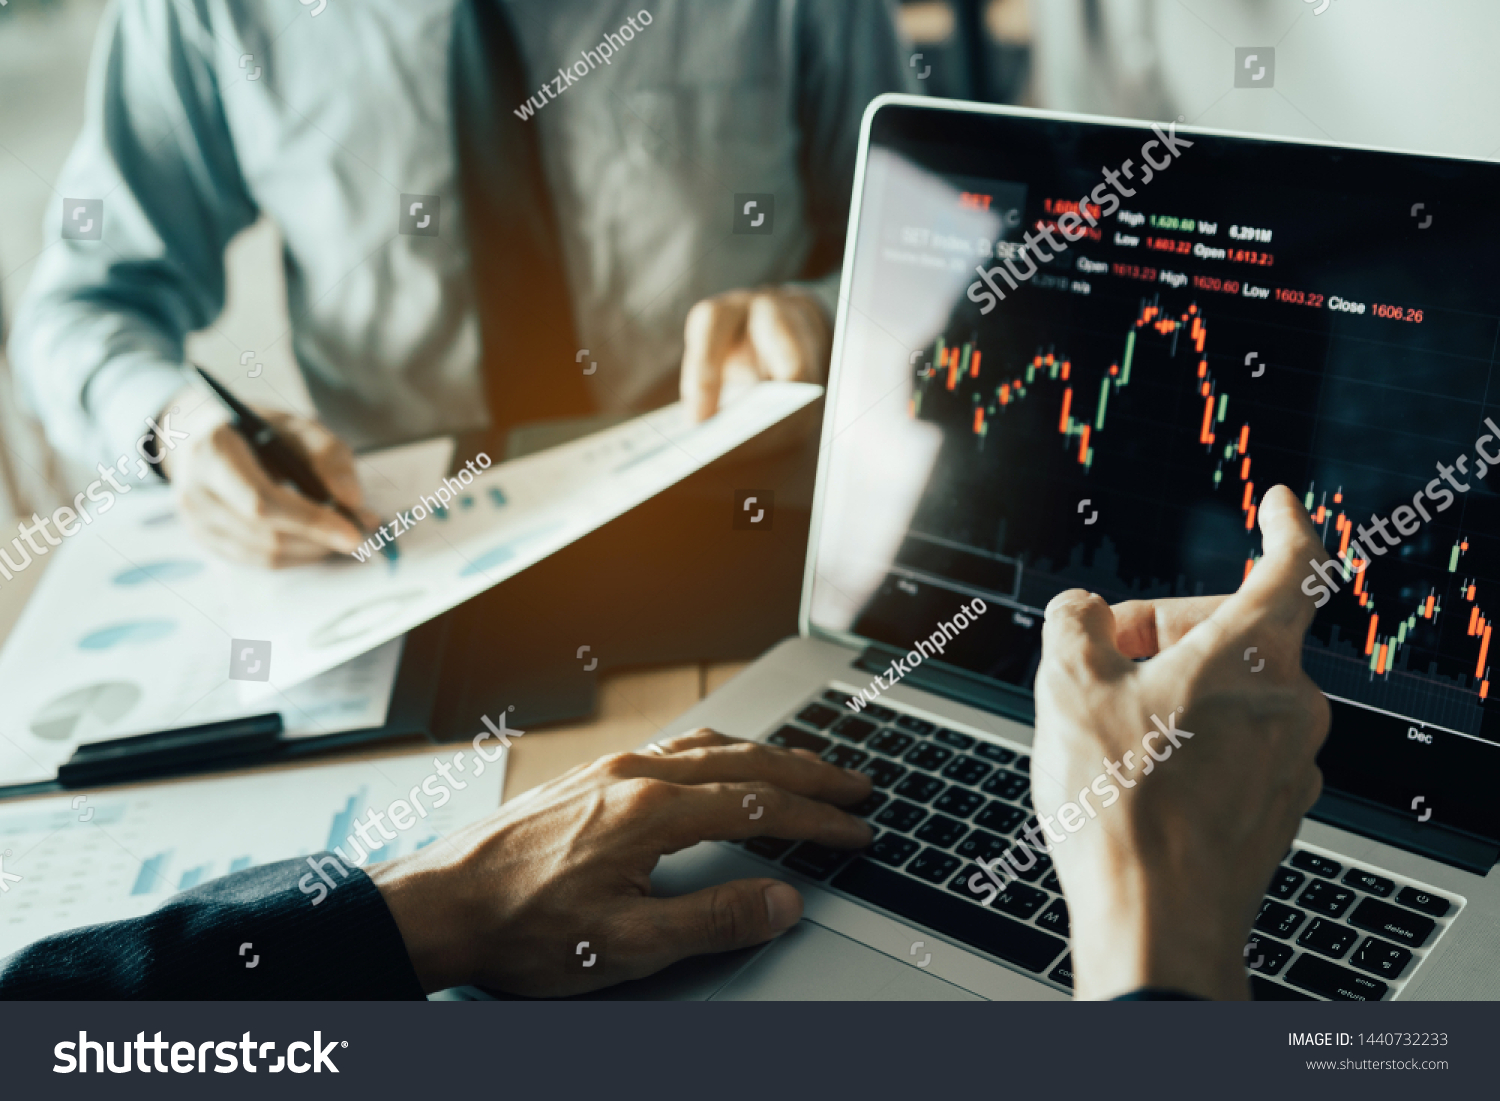 Investors are pointing to laptops that have investment information stock markets and partners taking notes and analyzing performance data. #1440732233